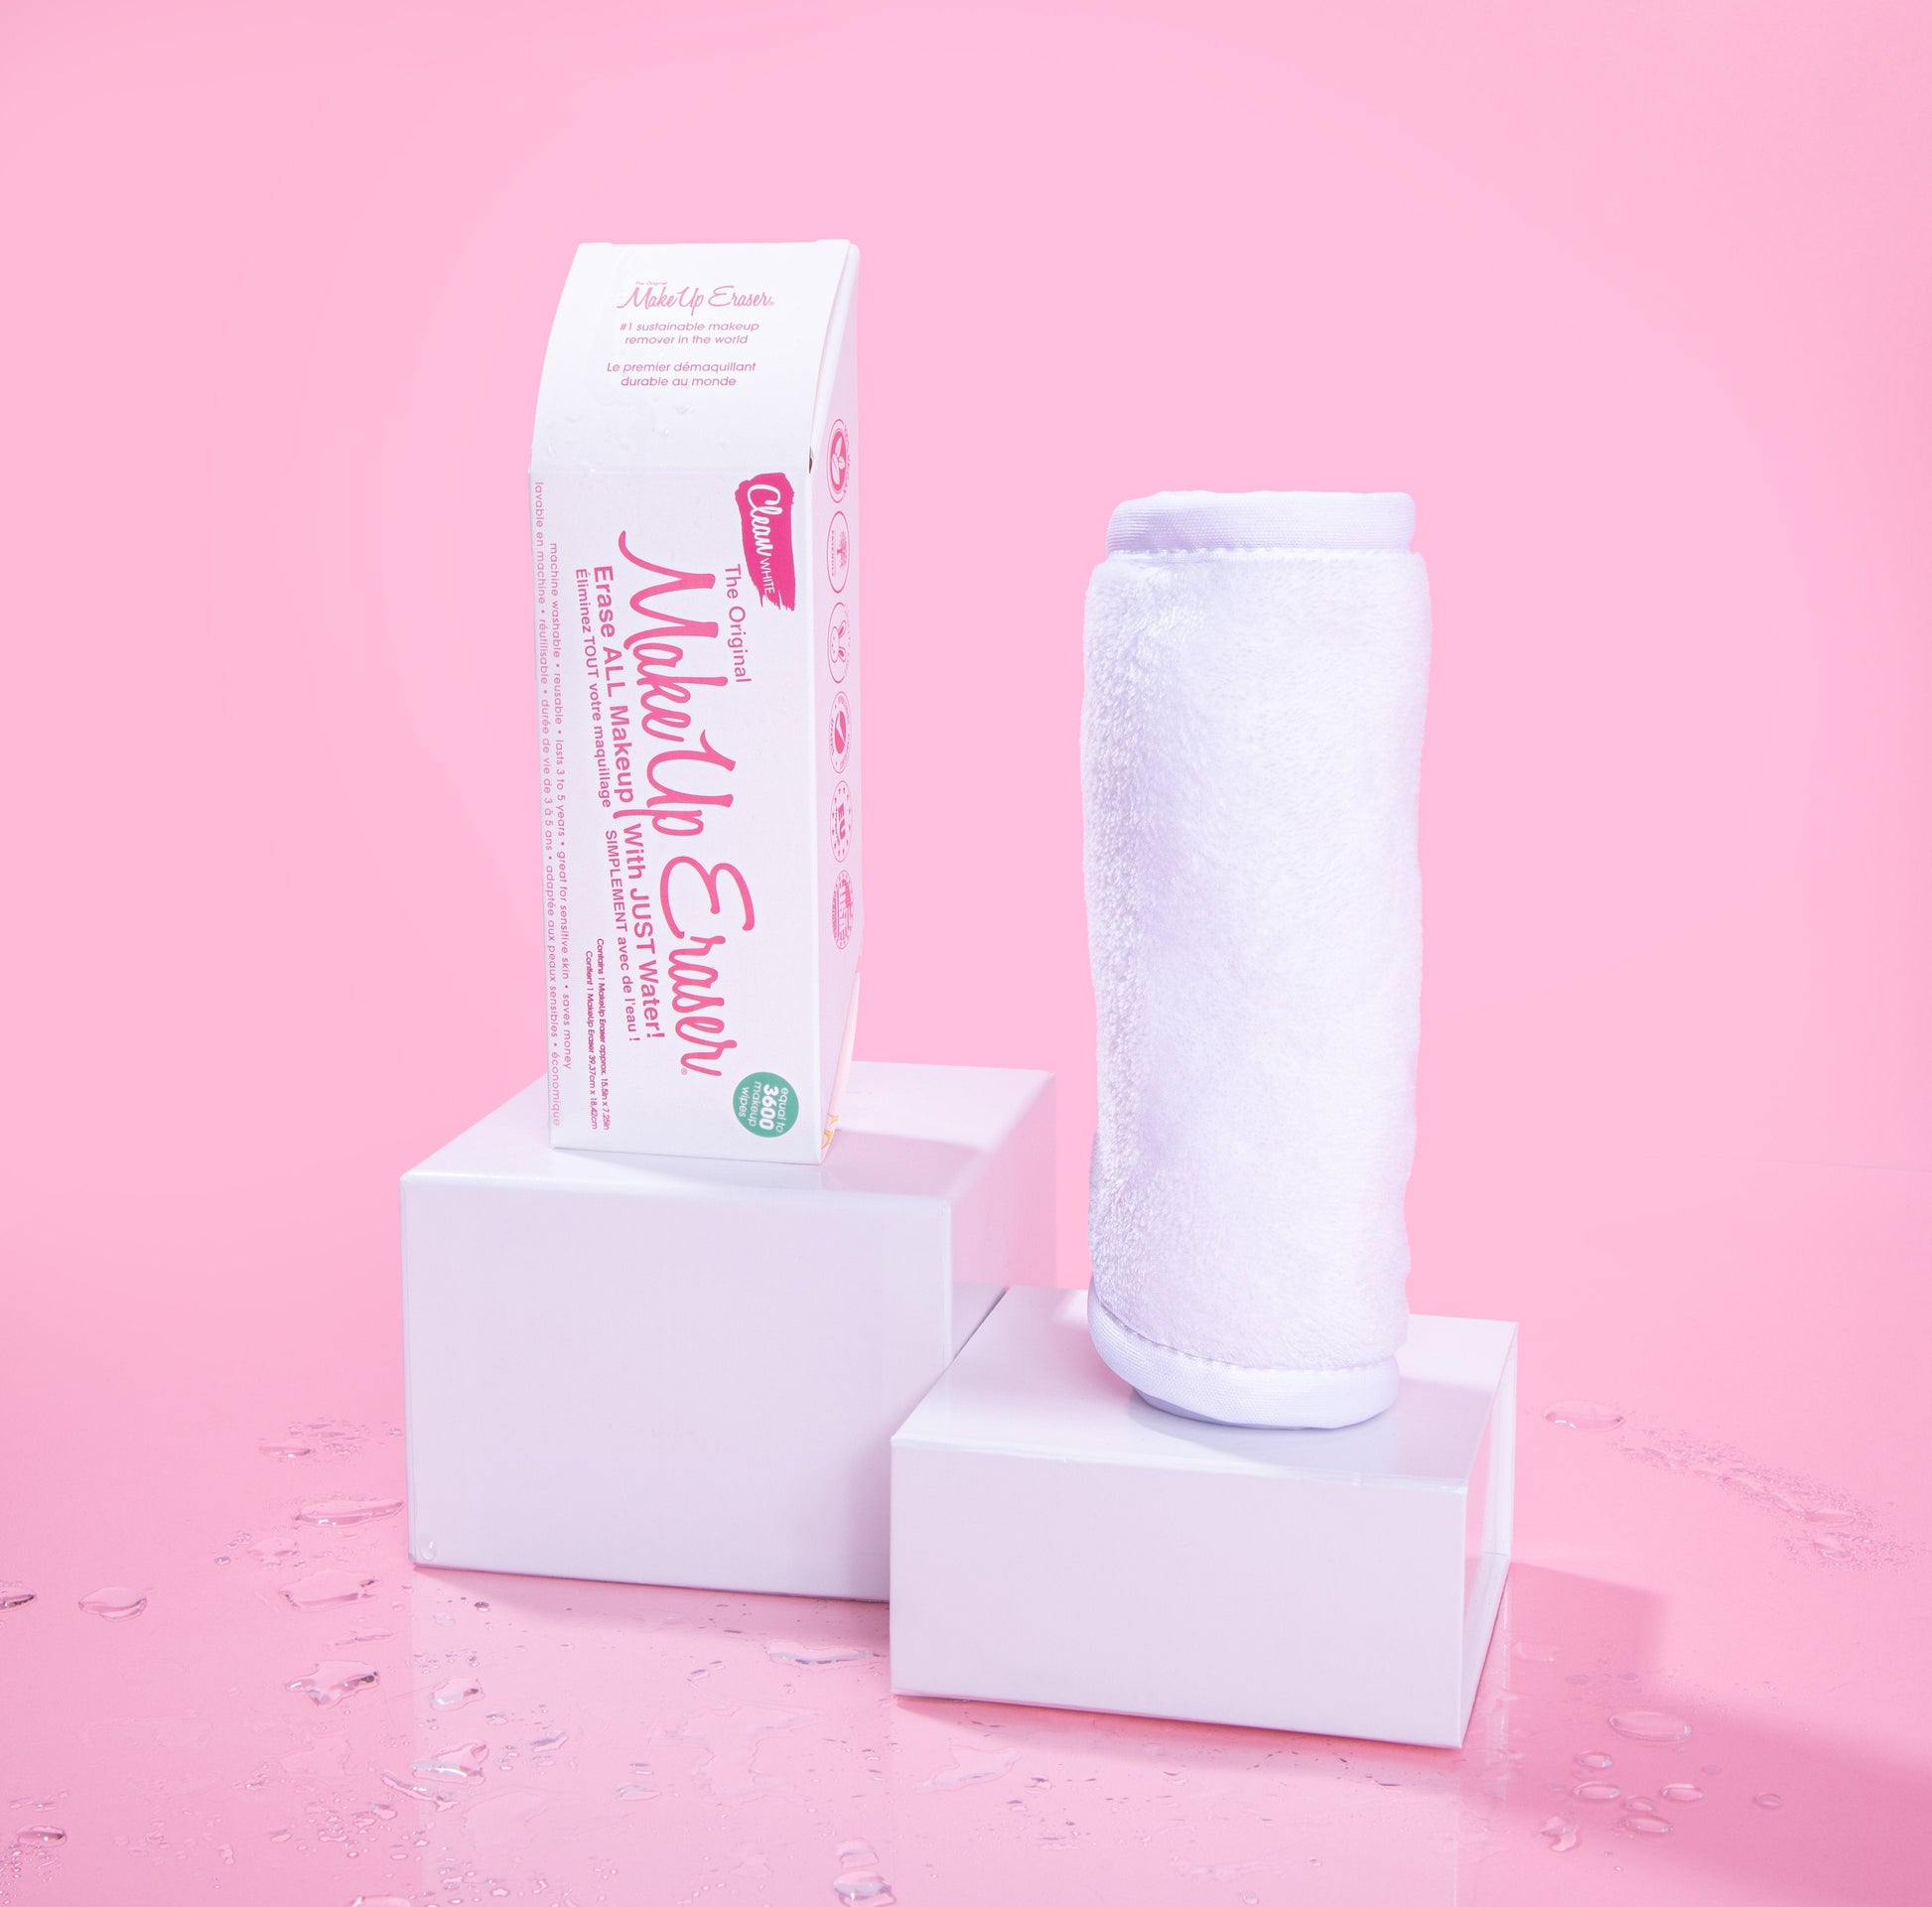 Rolled up Clean White MakeUp Eraser next to packaging, both propped up on platforms.